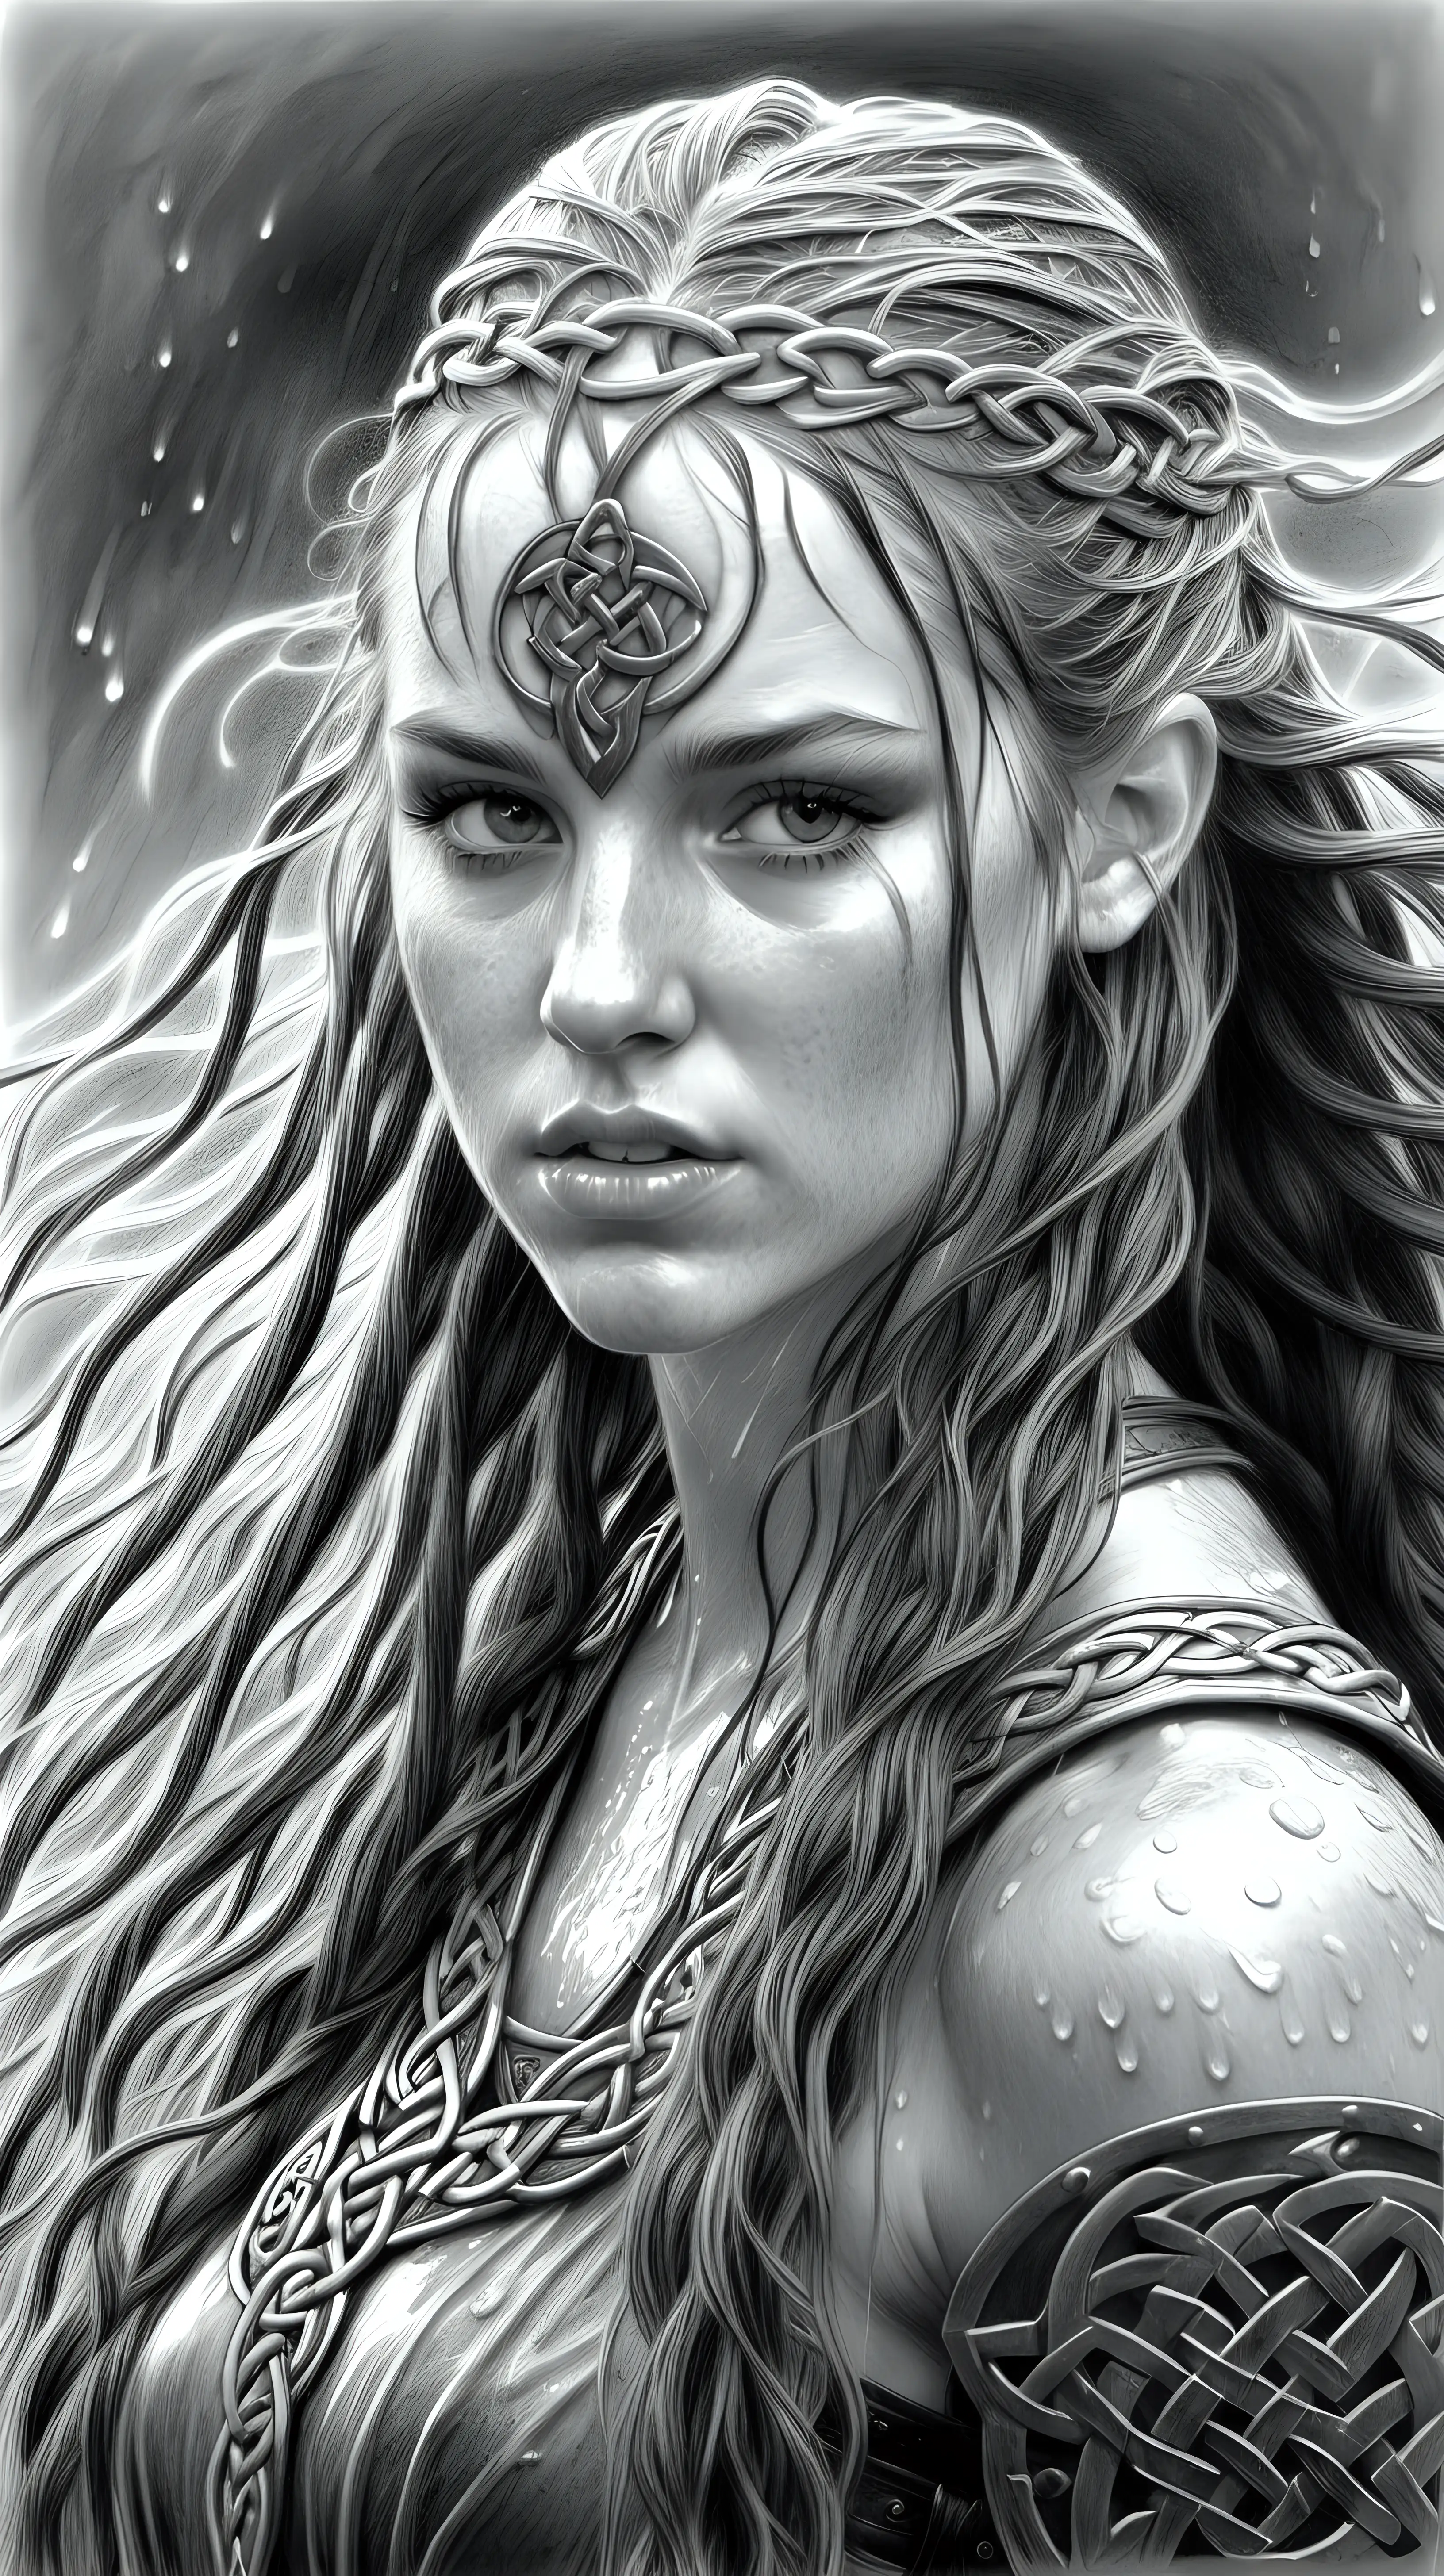 Celtic Warrior Girl with Long Hair in Pencil Drawing